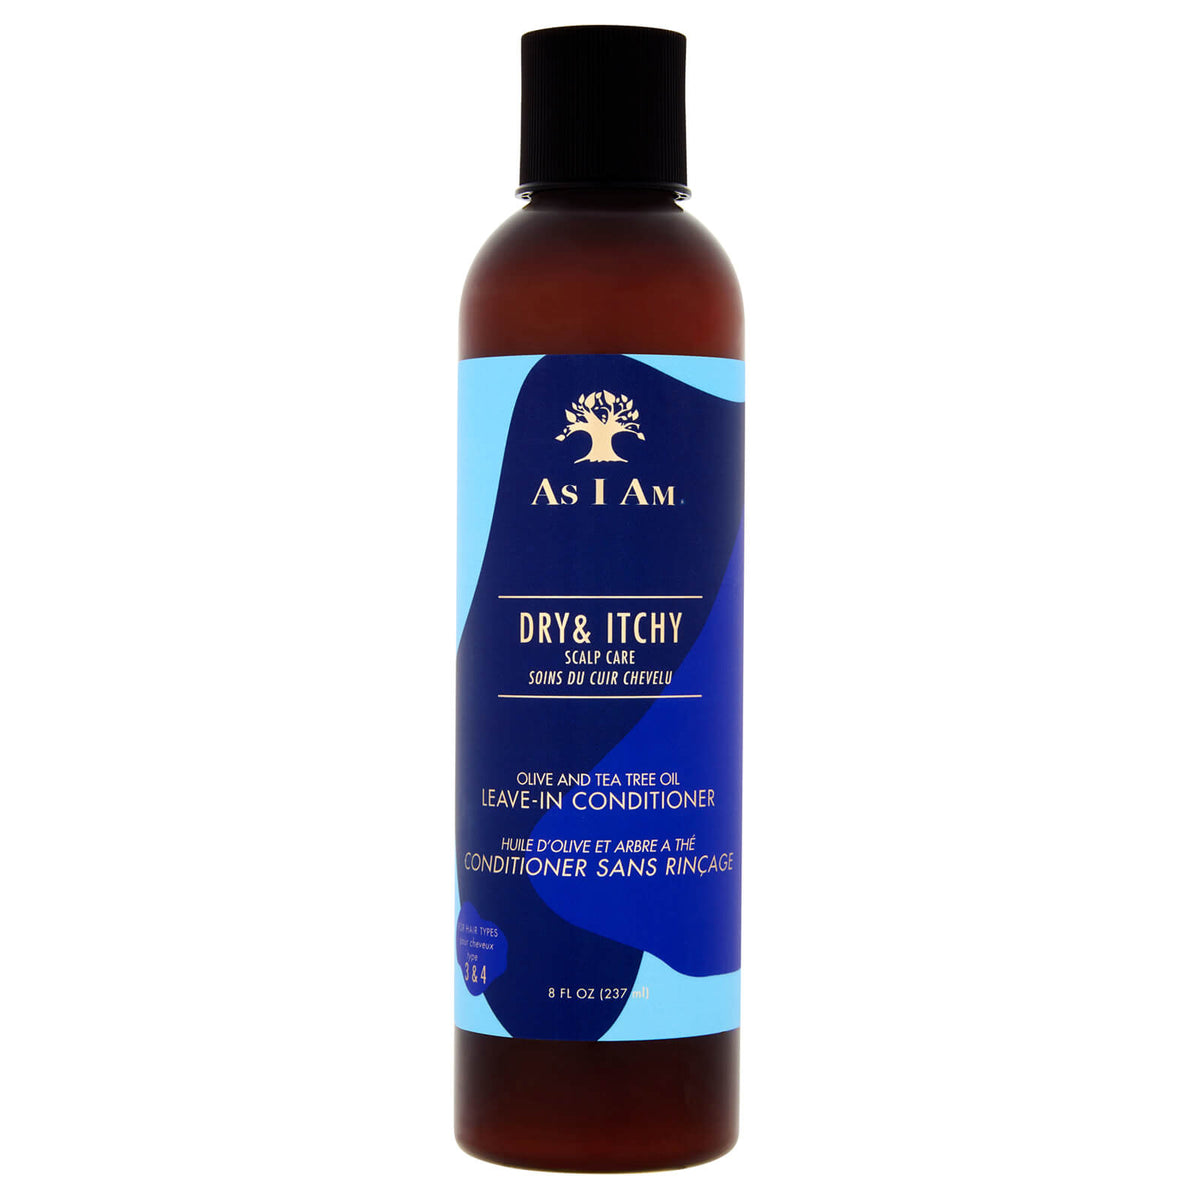 AS I AM - DRY & ITCHY OLIVE & TEA TREE OIL LEAVE-IN CONDITIONER, 237 ML